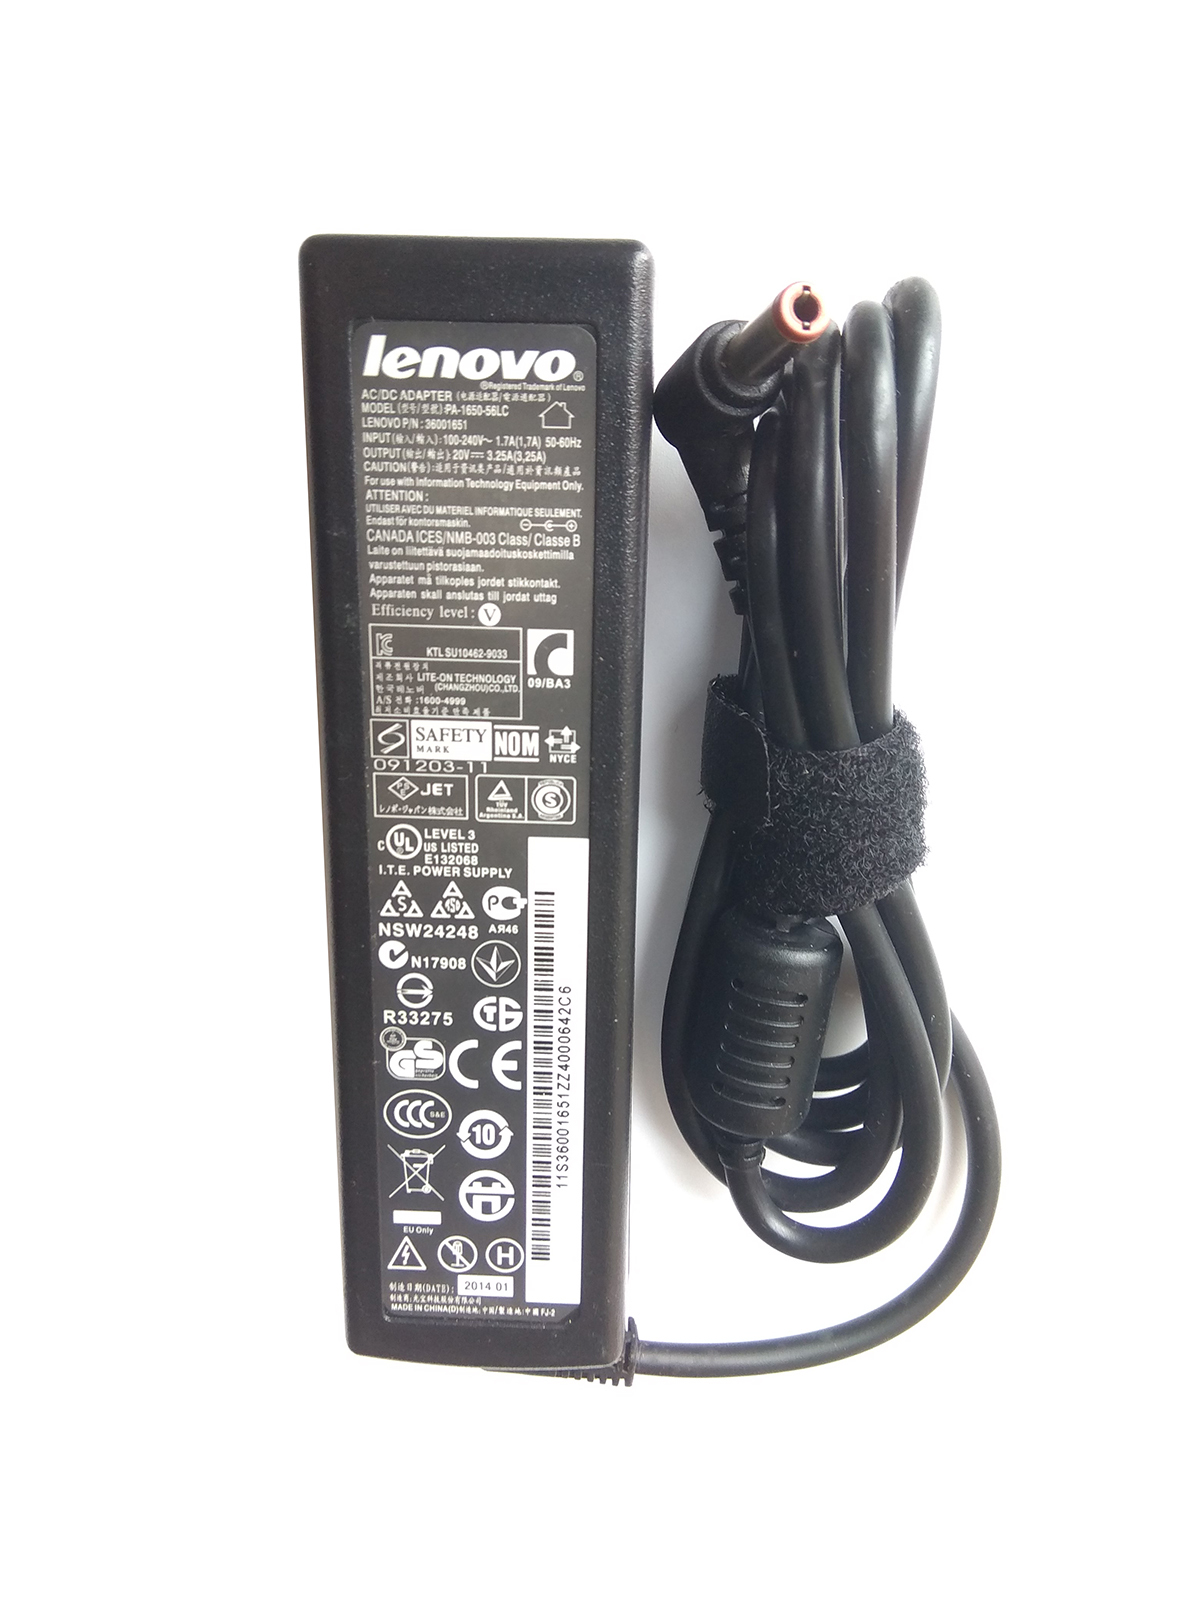 20V 3.25A 65W Lenovo AC Adapter Replace Liteon PA-1650-68 Power Supply - $35.99